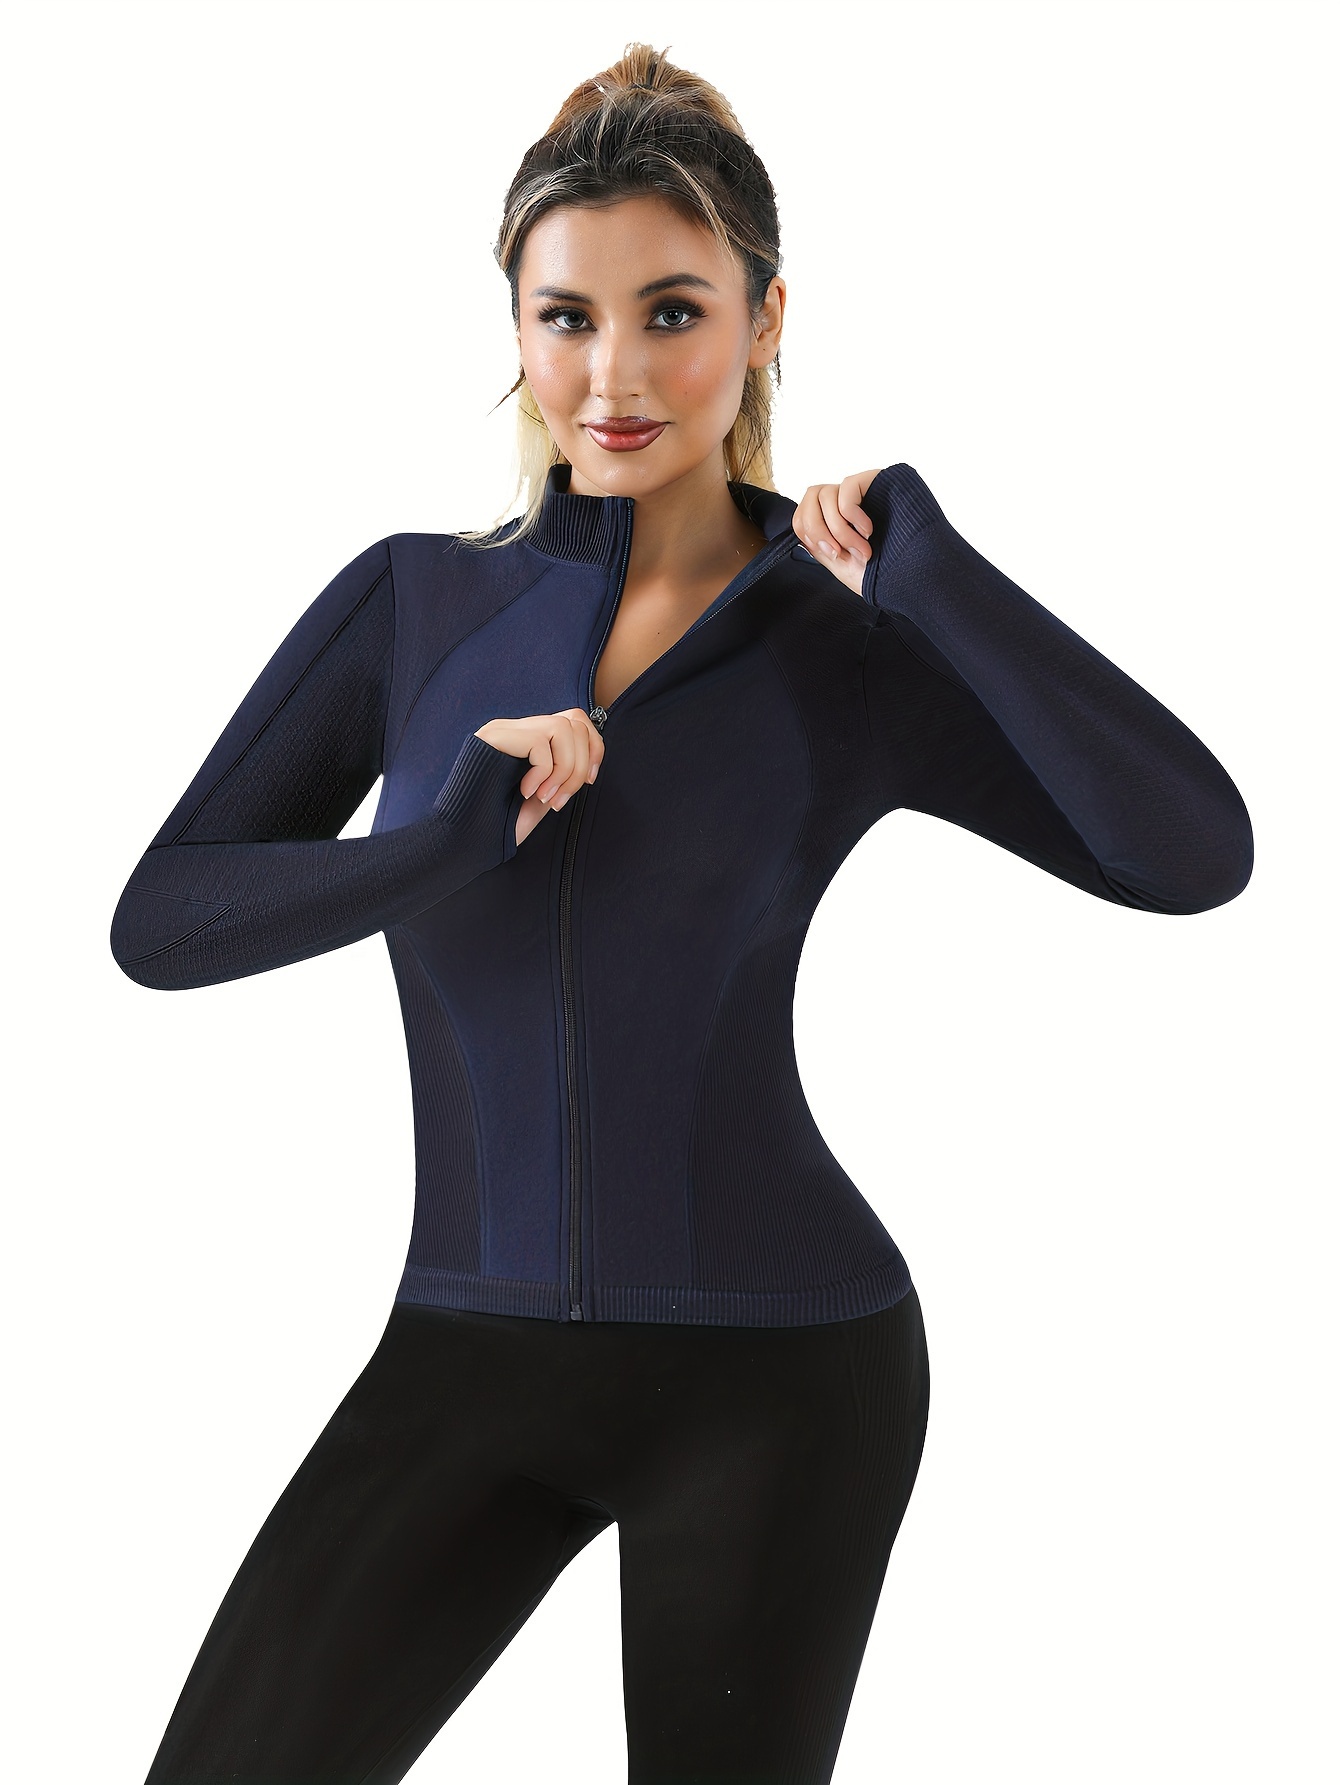 Women's Solid Color Long Sleeve Athletic Top With Thumb Hole, Full Zip Up  Crop Jacket For Yoga Running Fitness Gym, Women's Activewear